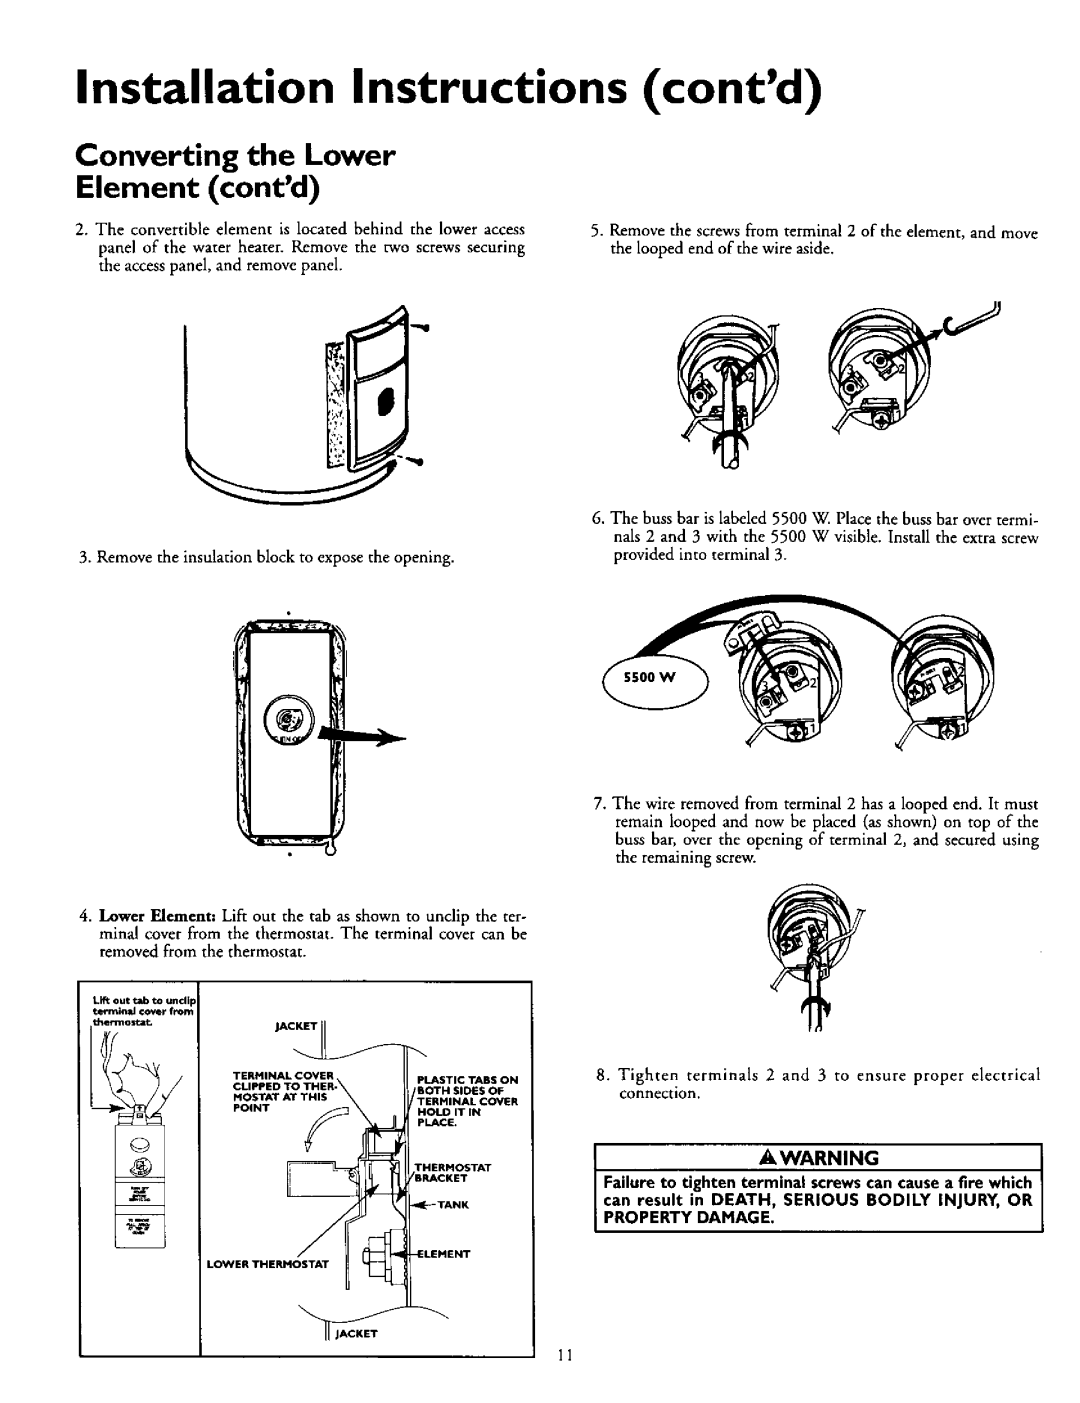 Kenmore 153.316252, 153.316554, 153.316555 Installation Instructions contd, Converting the Lower Element contd, Awarning 